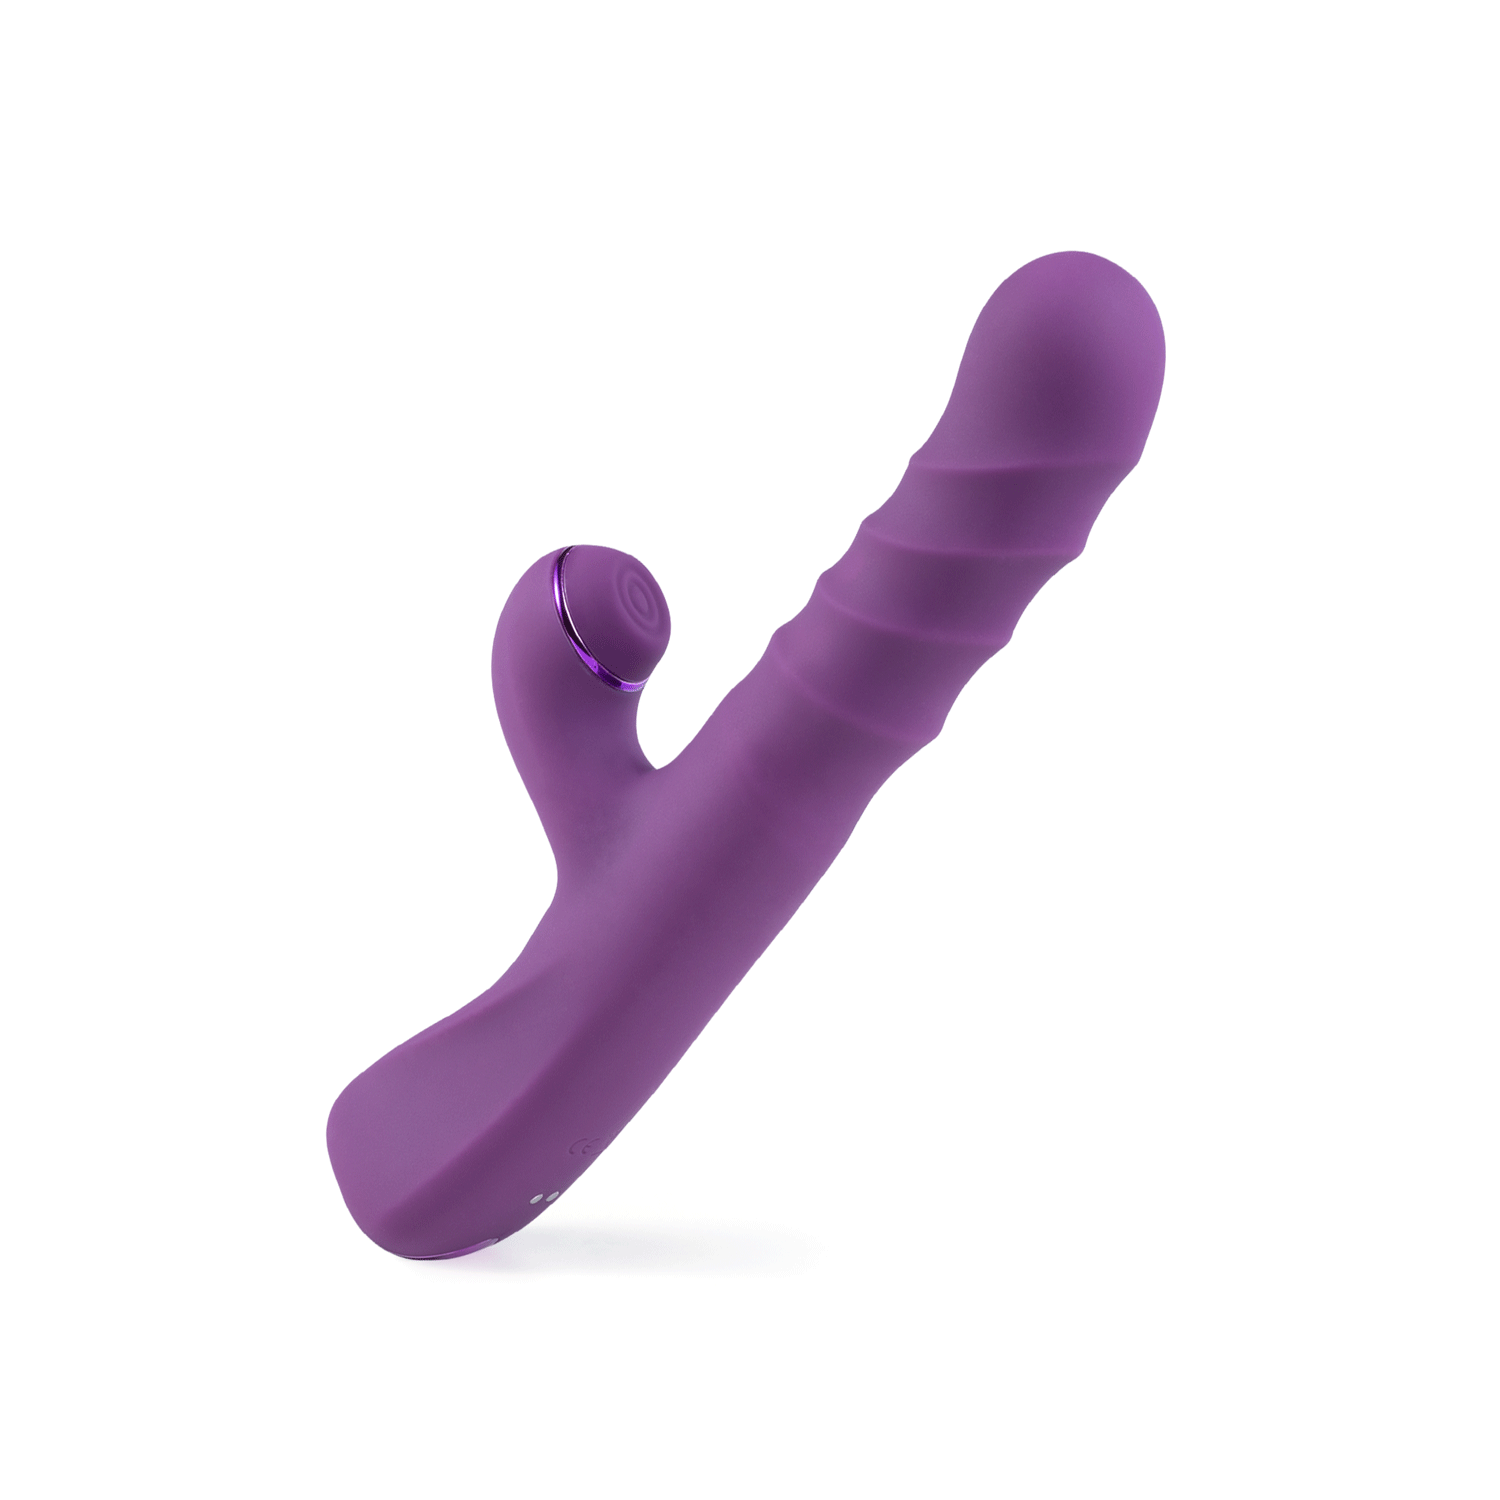 Waterproof Clitoralis Stimulator for Clit Nipple Anal Stimulation, Rechargeable Adult Sex Toys for Women